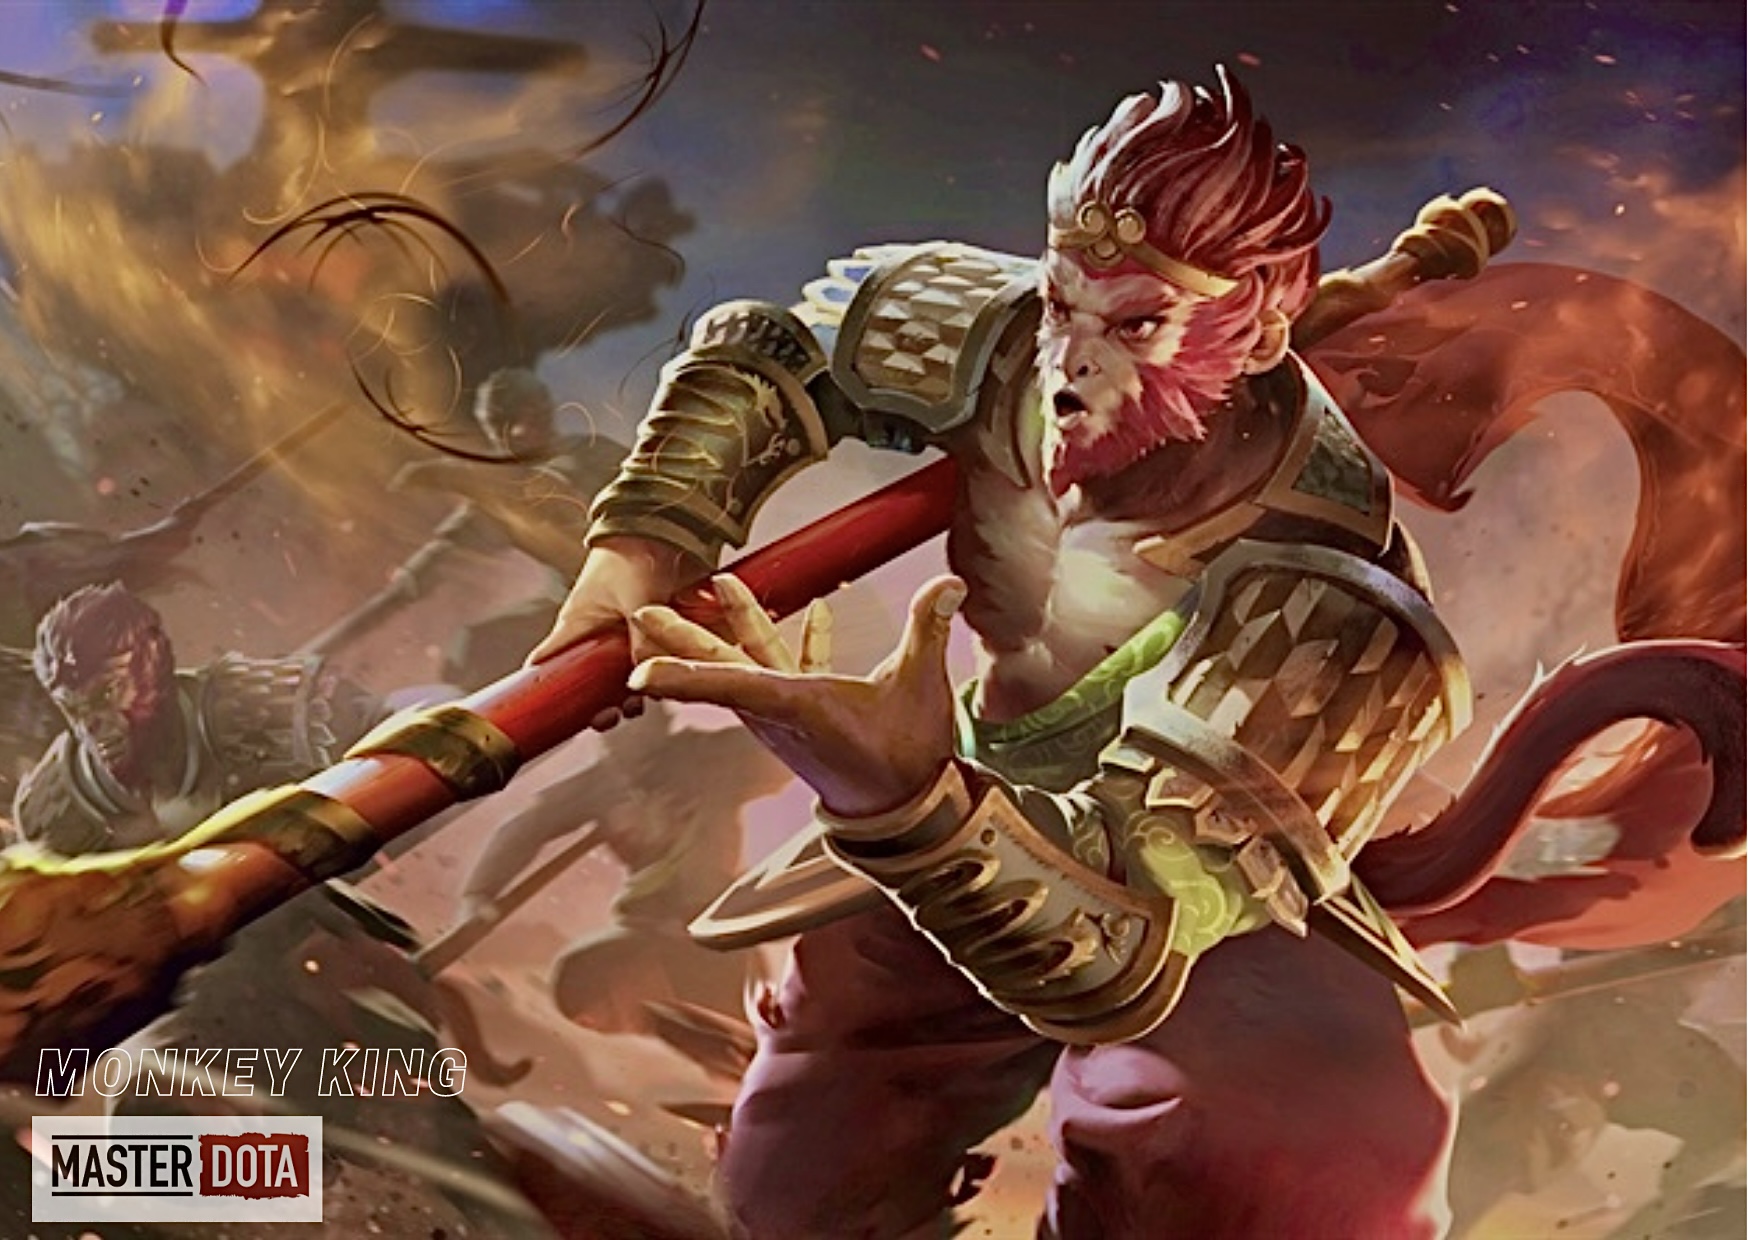 Monkey King Dota 2 Guide Building Items and Indicators